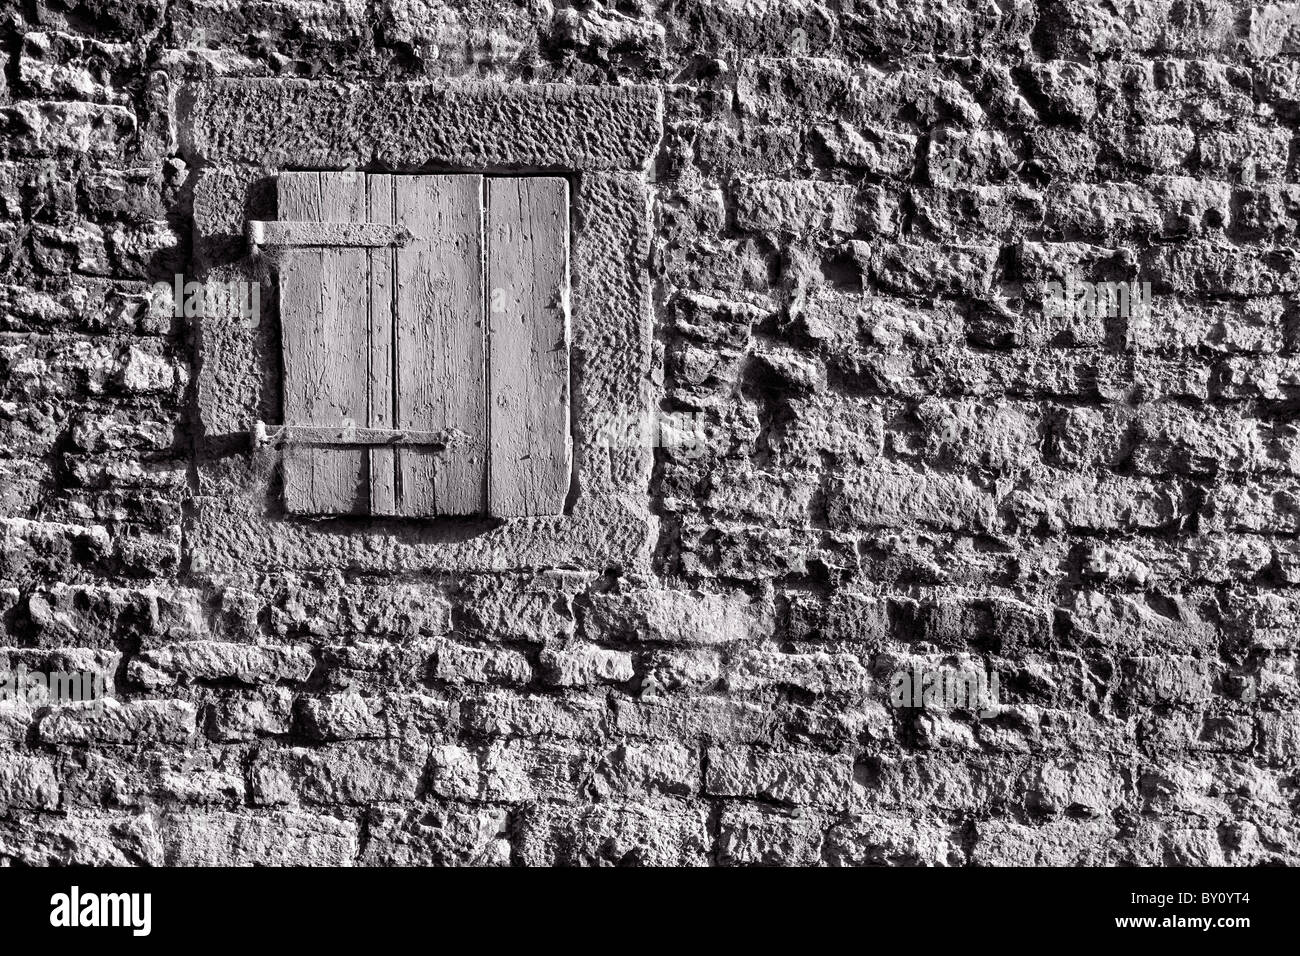 Shuttered window in the wall of a farm building Stock Photo